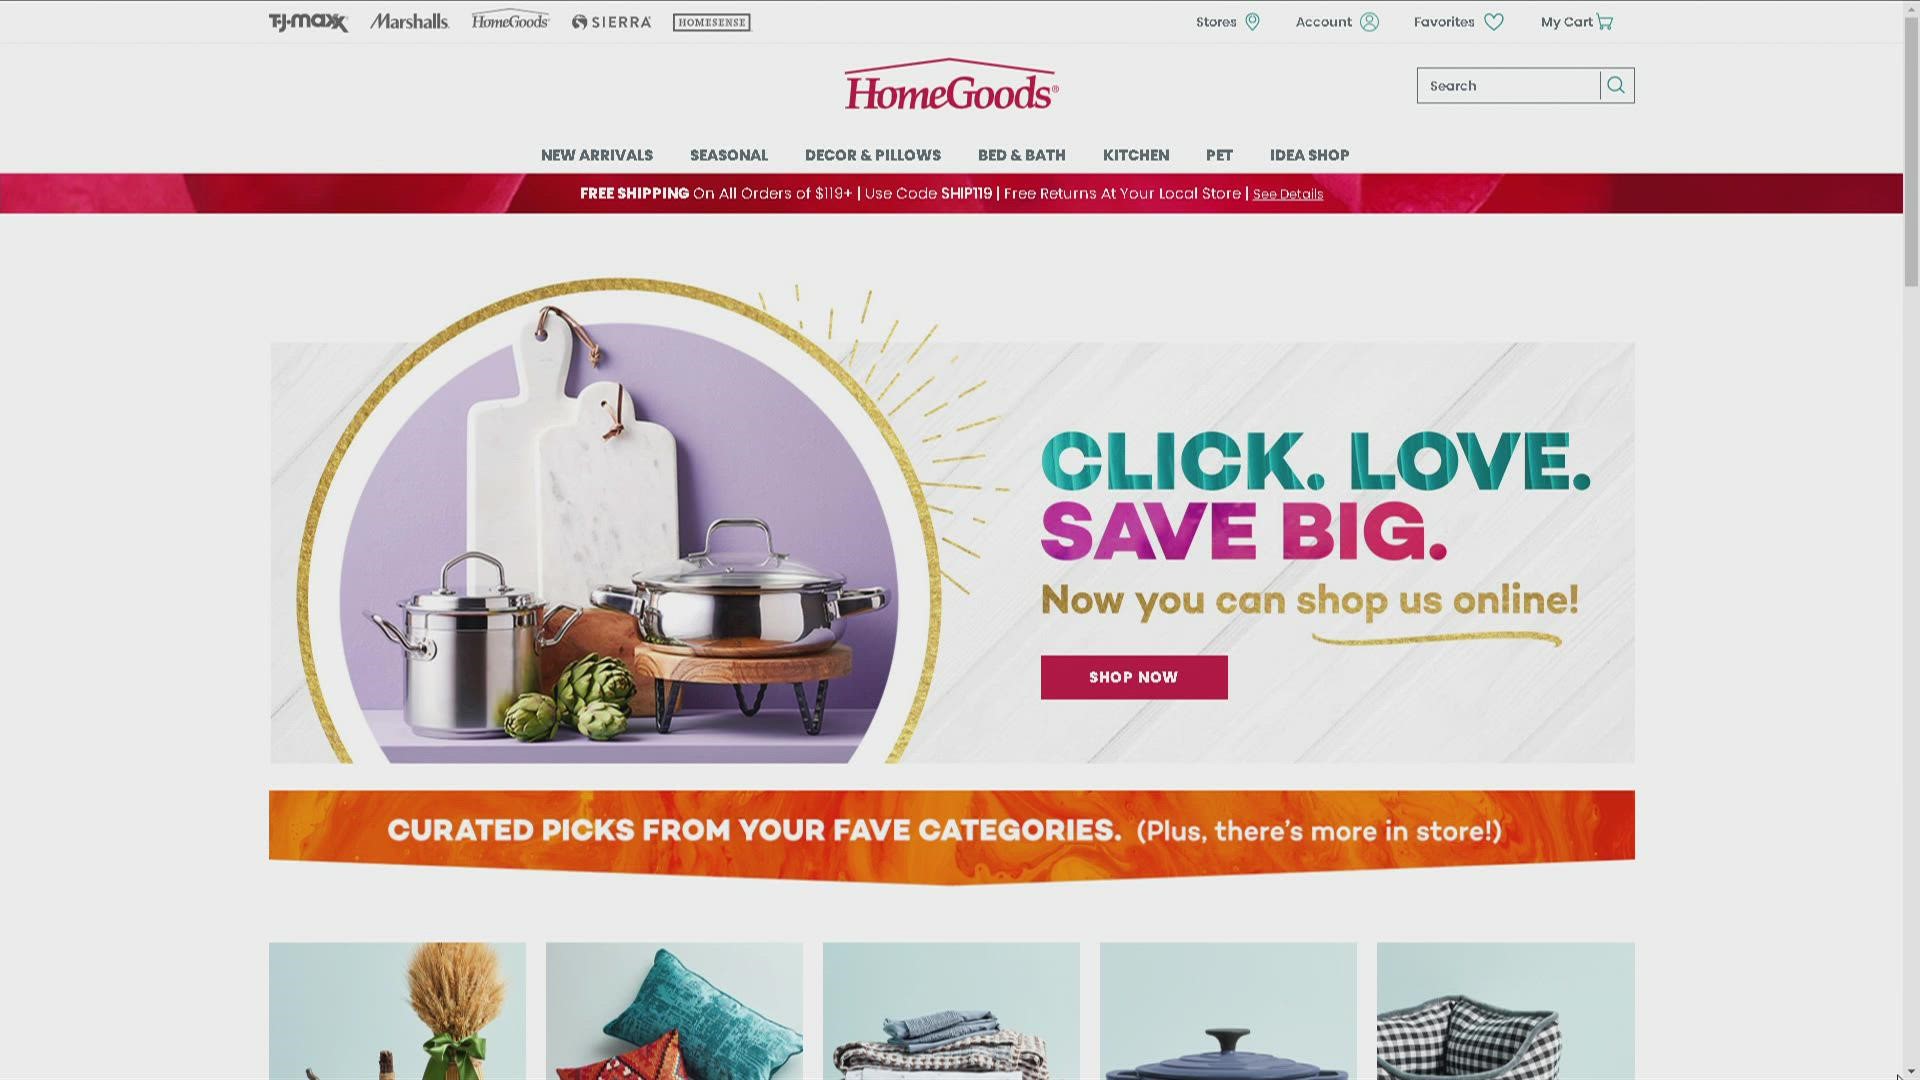 The off-price home décor retailer launched the website Tuesday, Sept. 28.